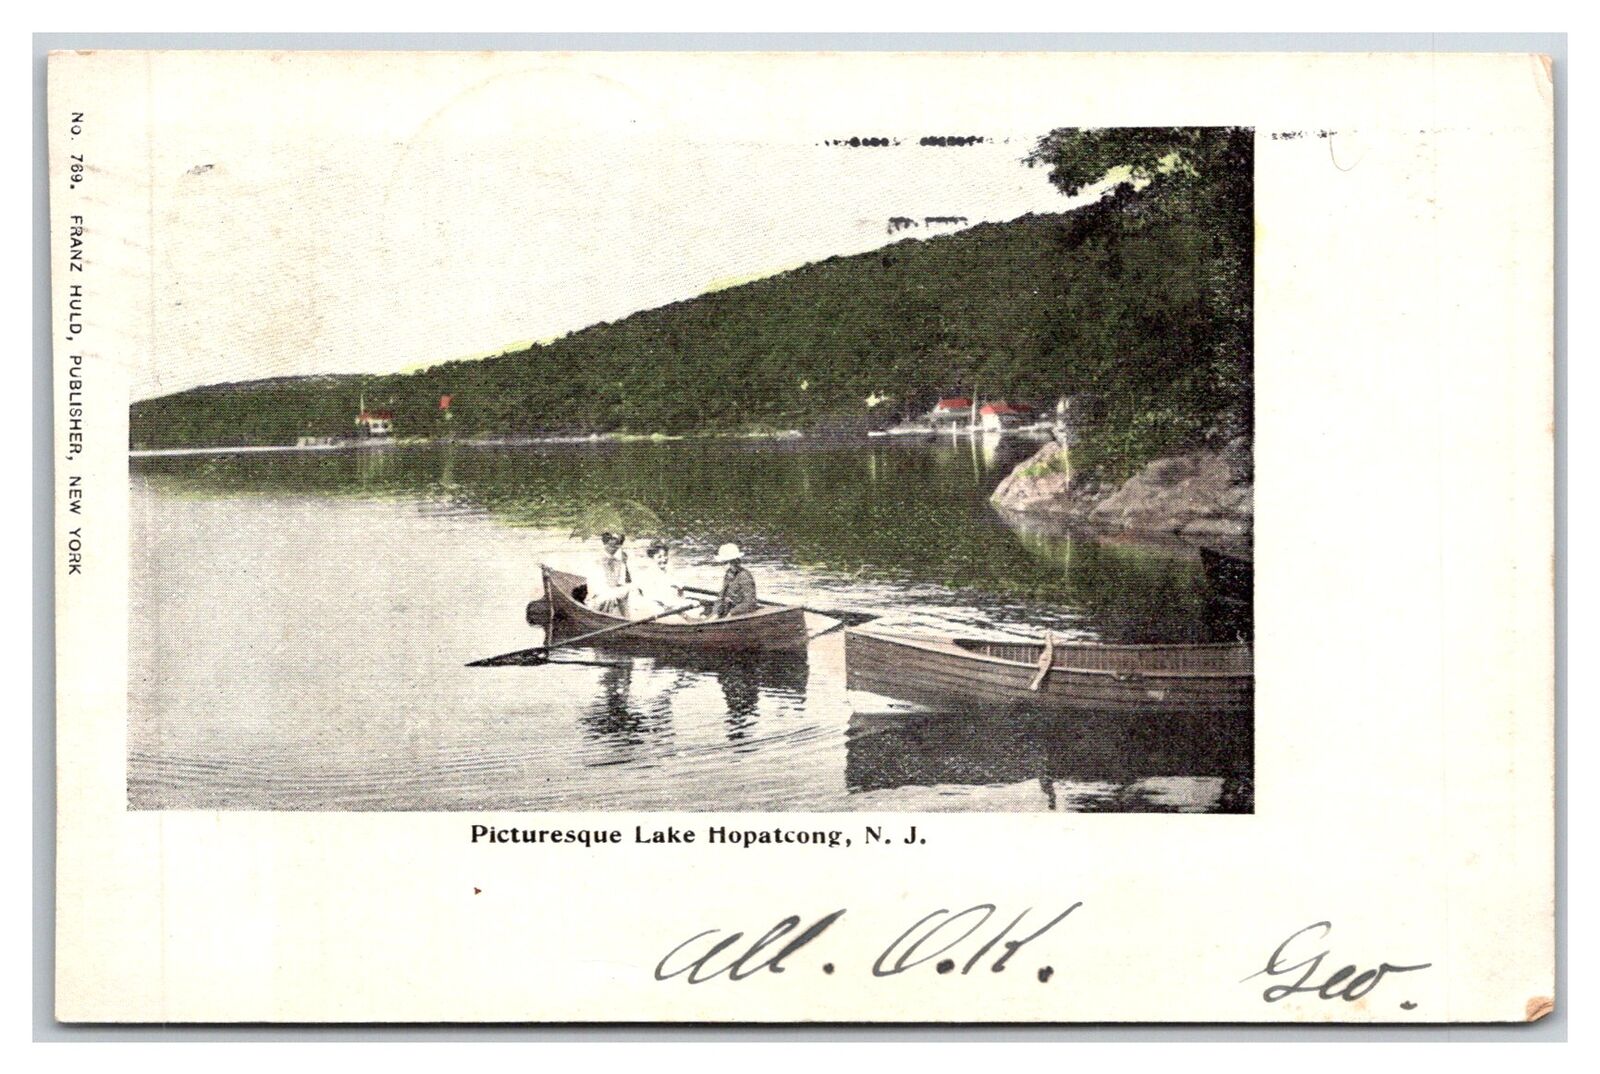 Victorian Ladies boating on picturesque LAKE HOPATCONG New Jersey